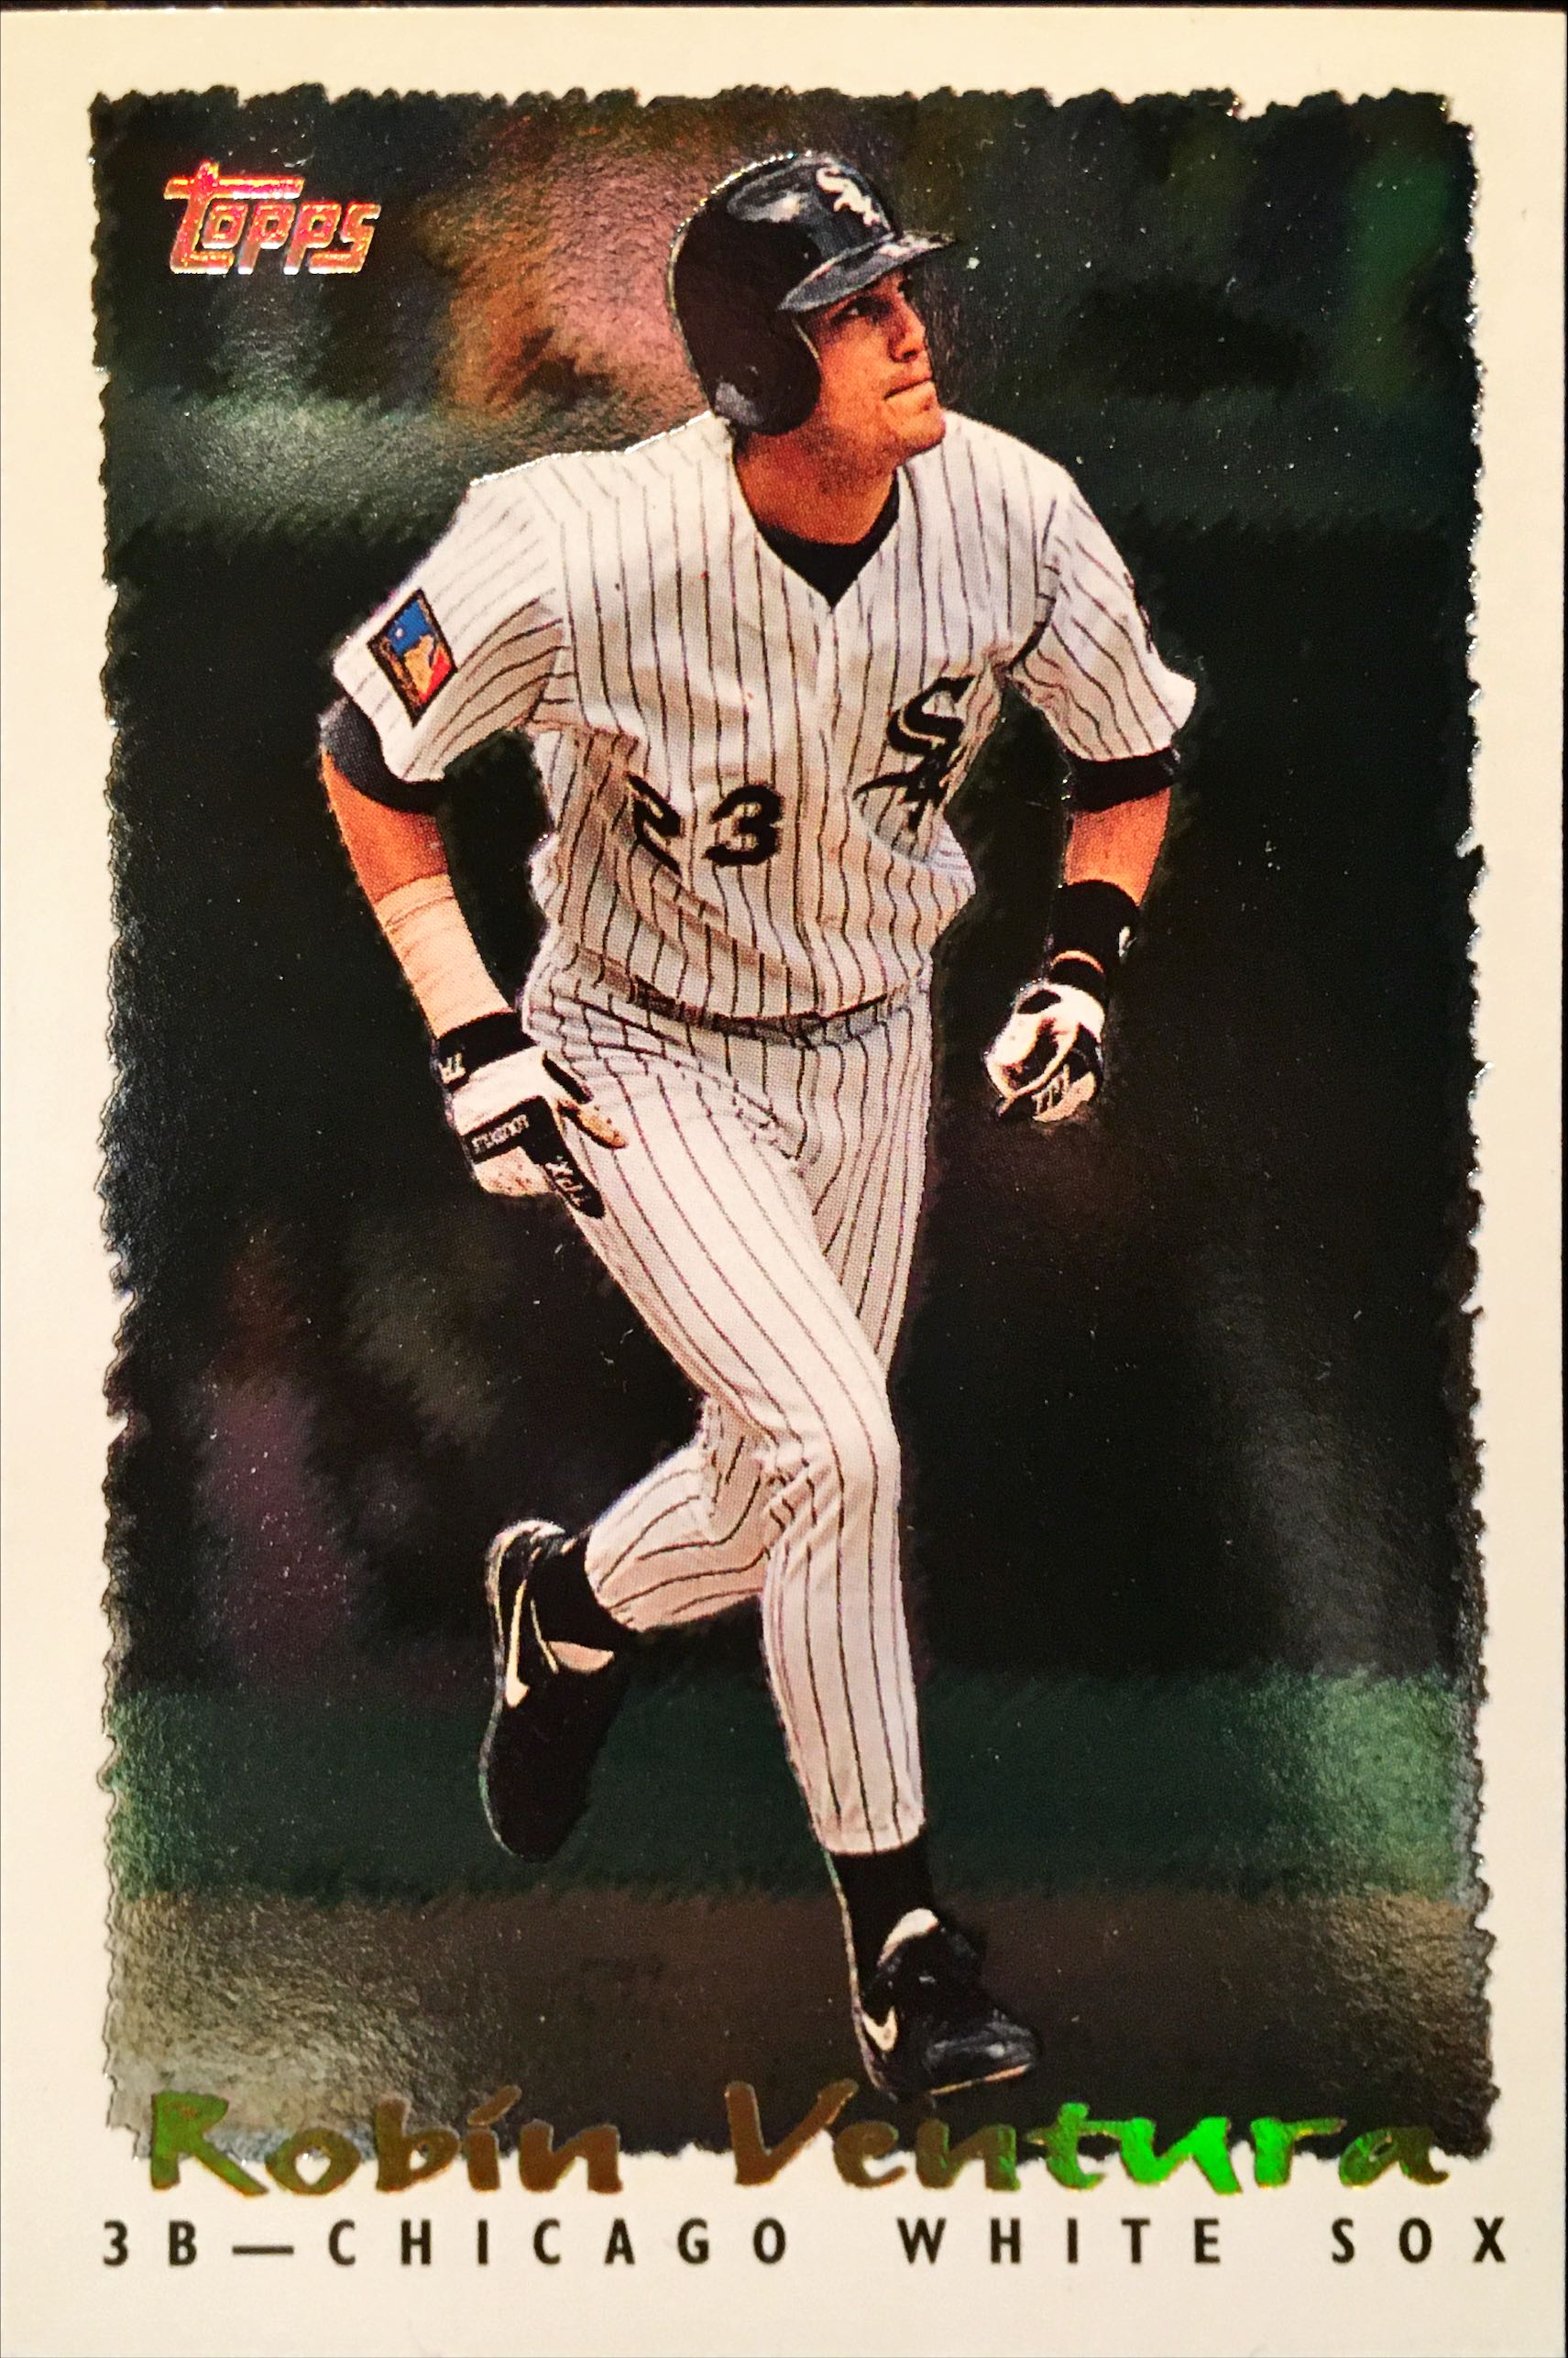 1995 Topps Cyberstats 272 front image